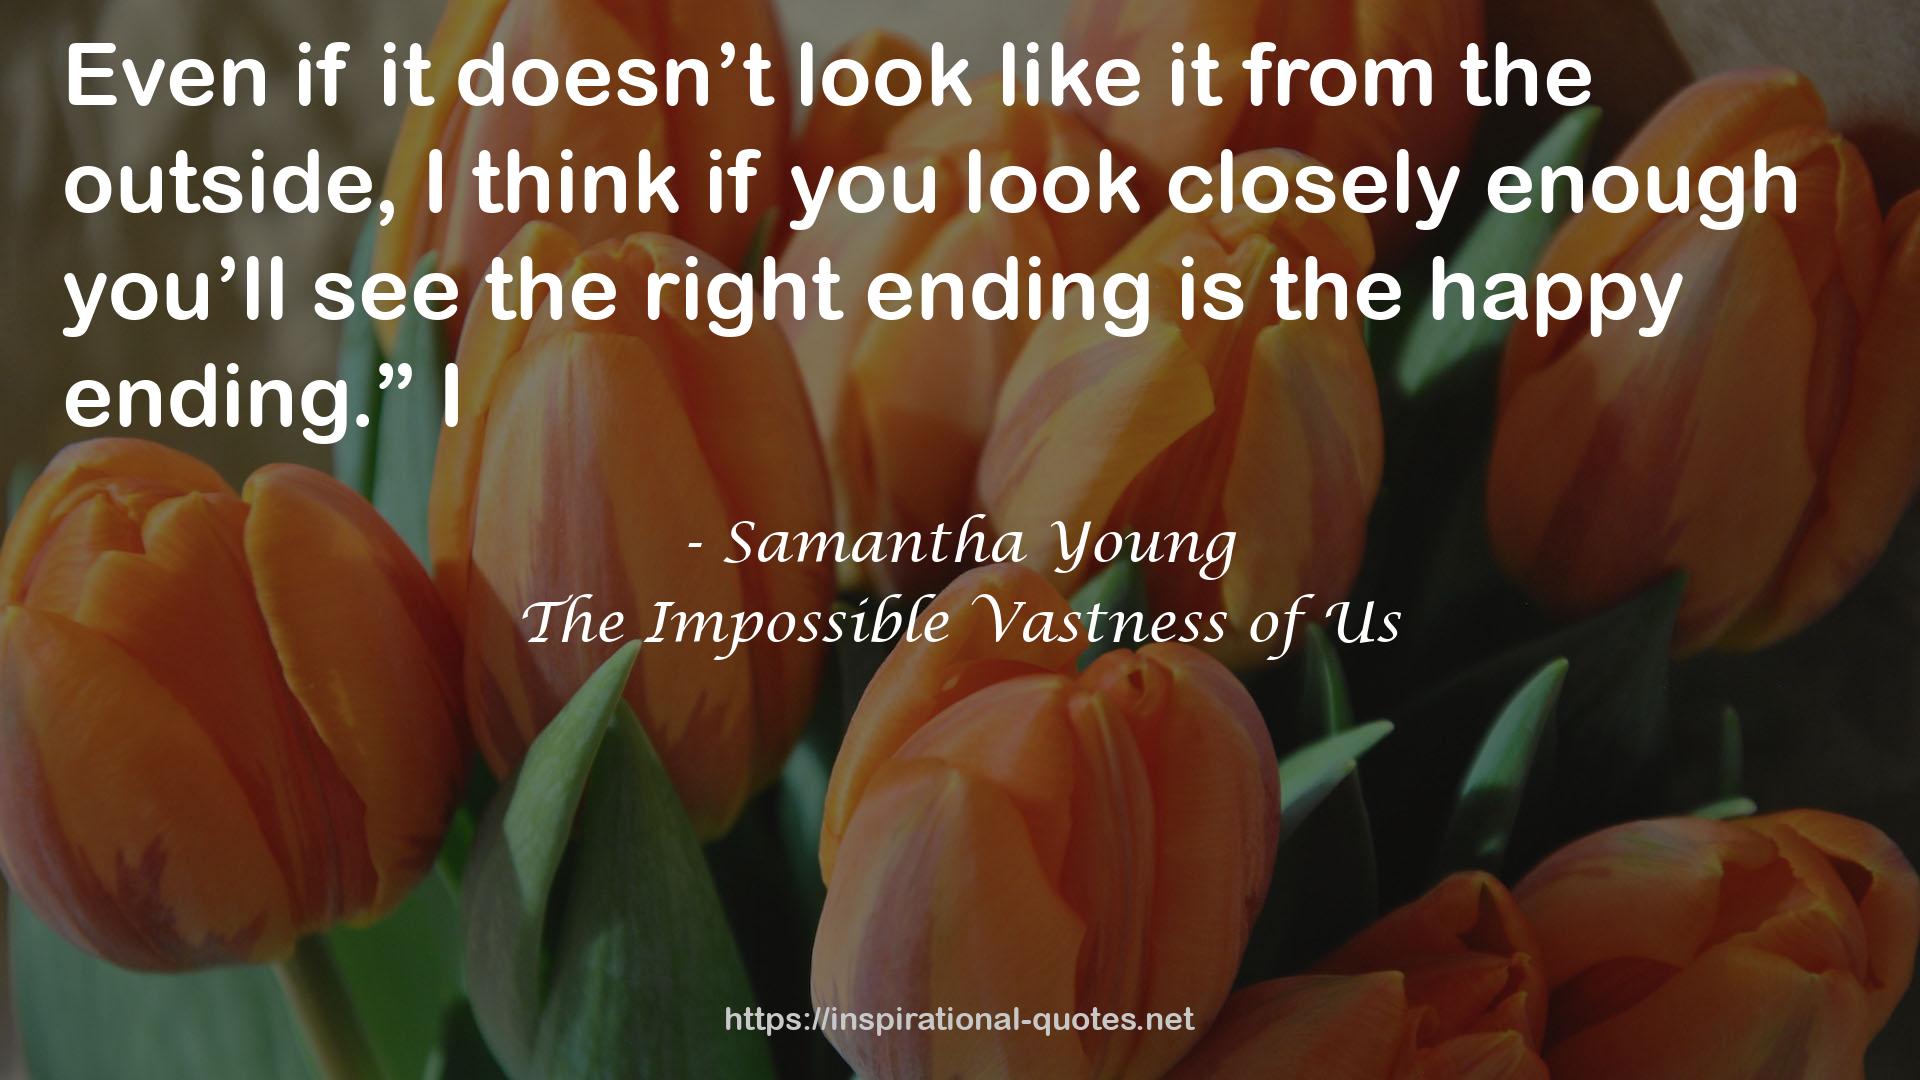 The Impossible Vastness of Us QUOTES